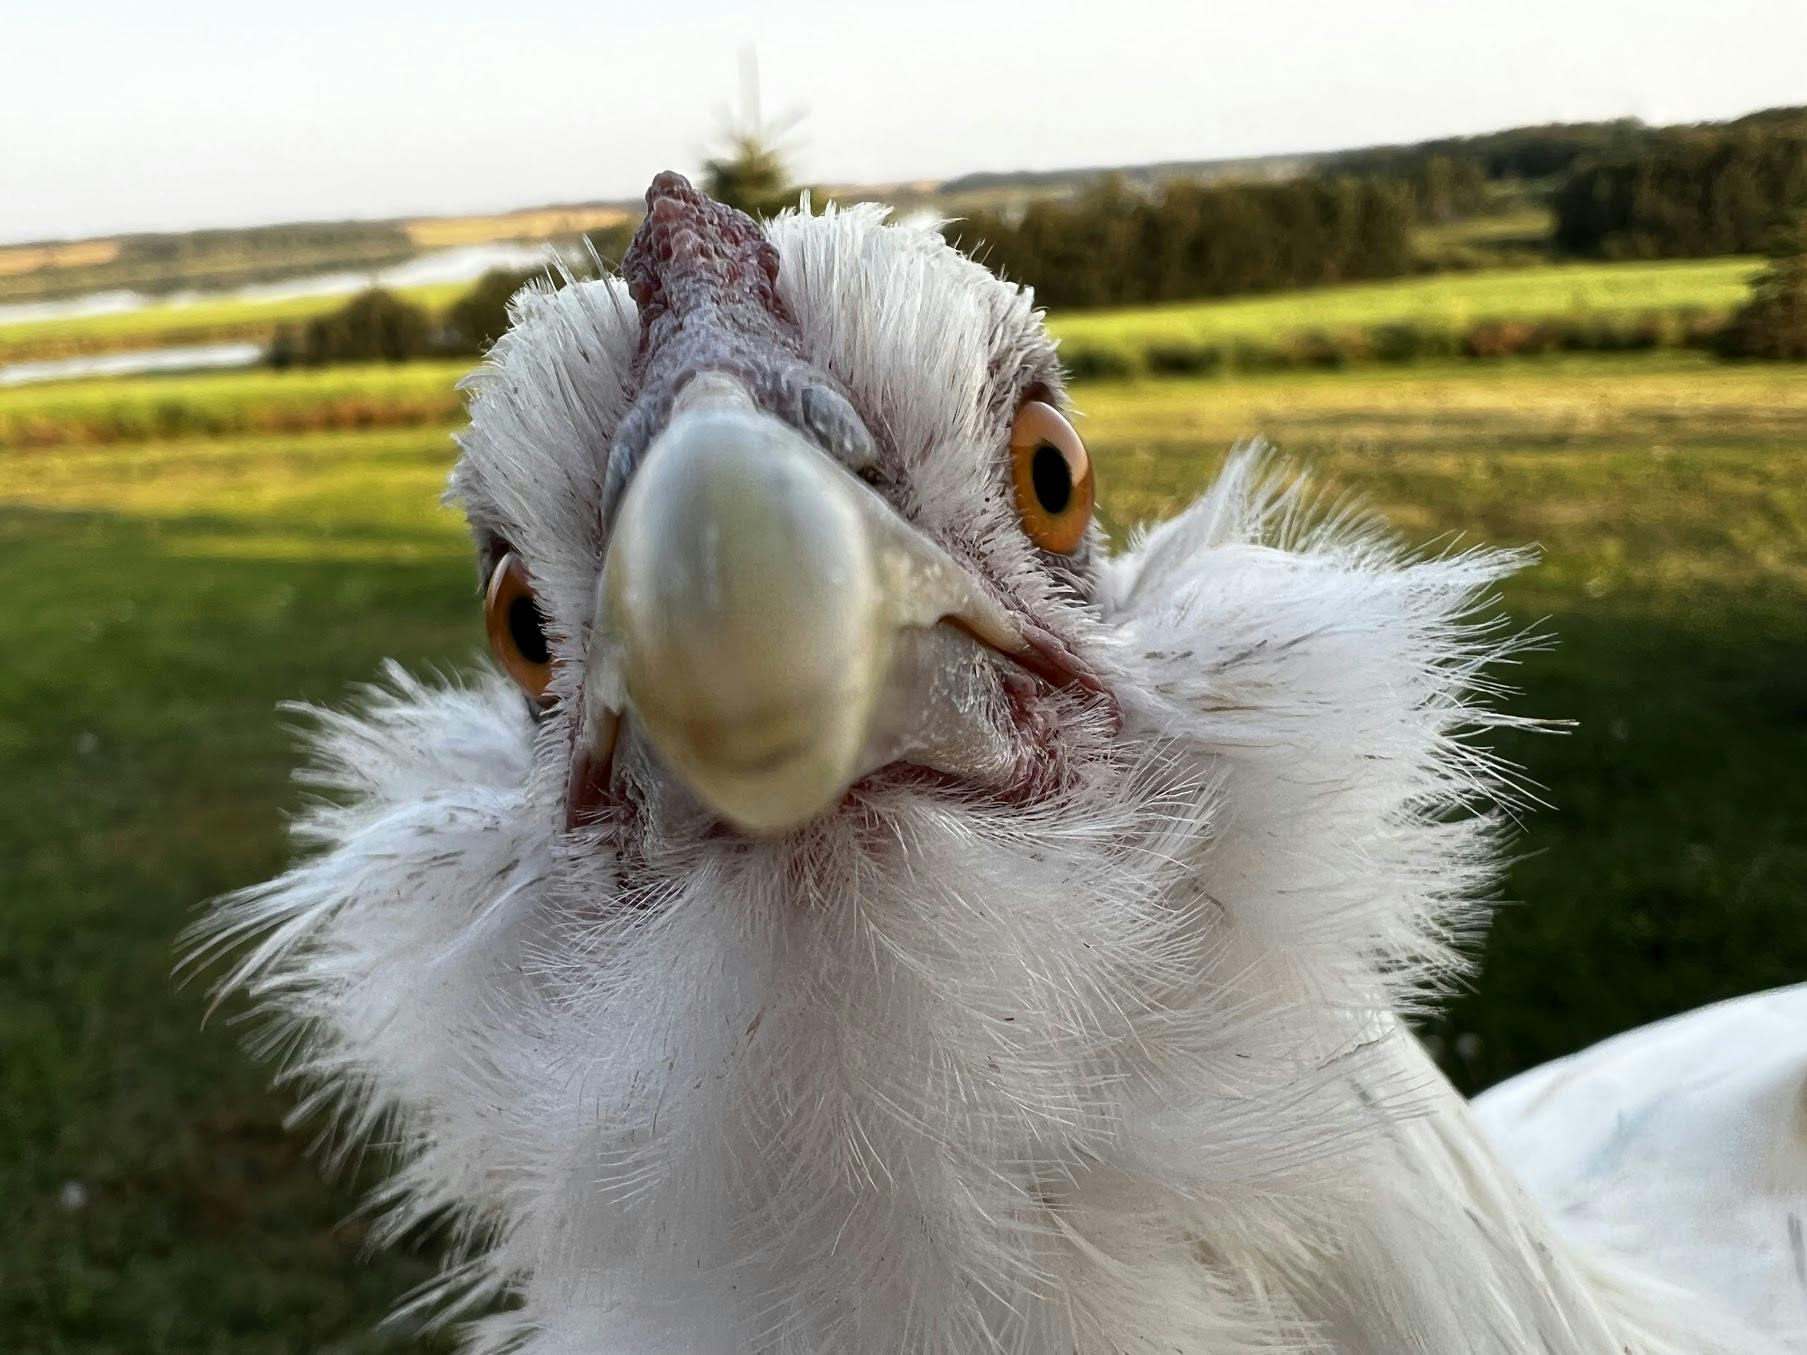 Close-up photograph of a chicken looking at the viewer